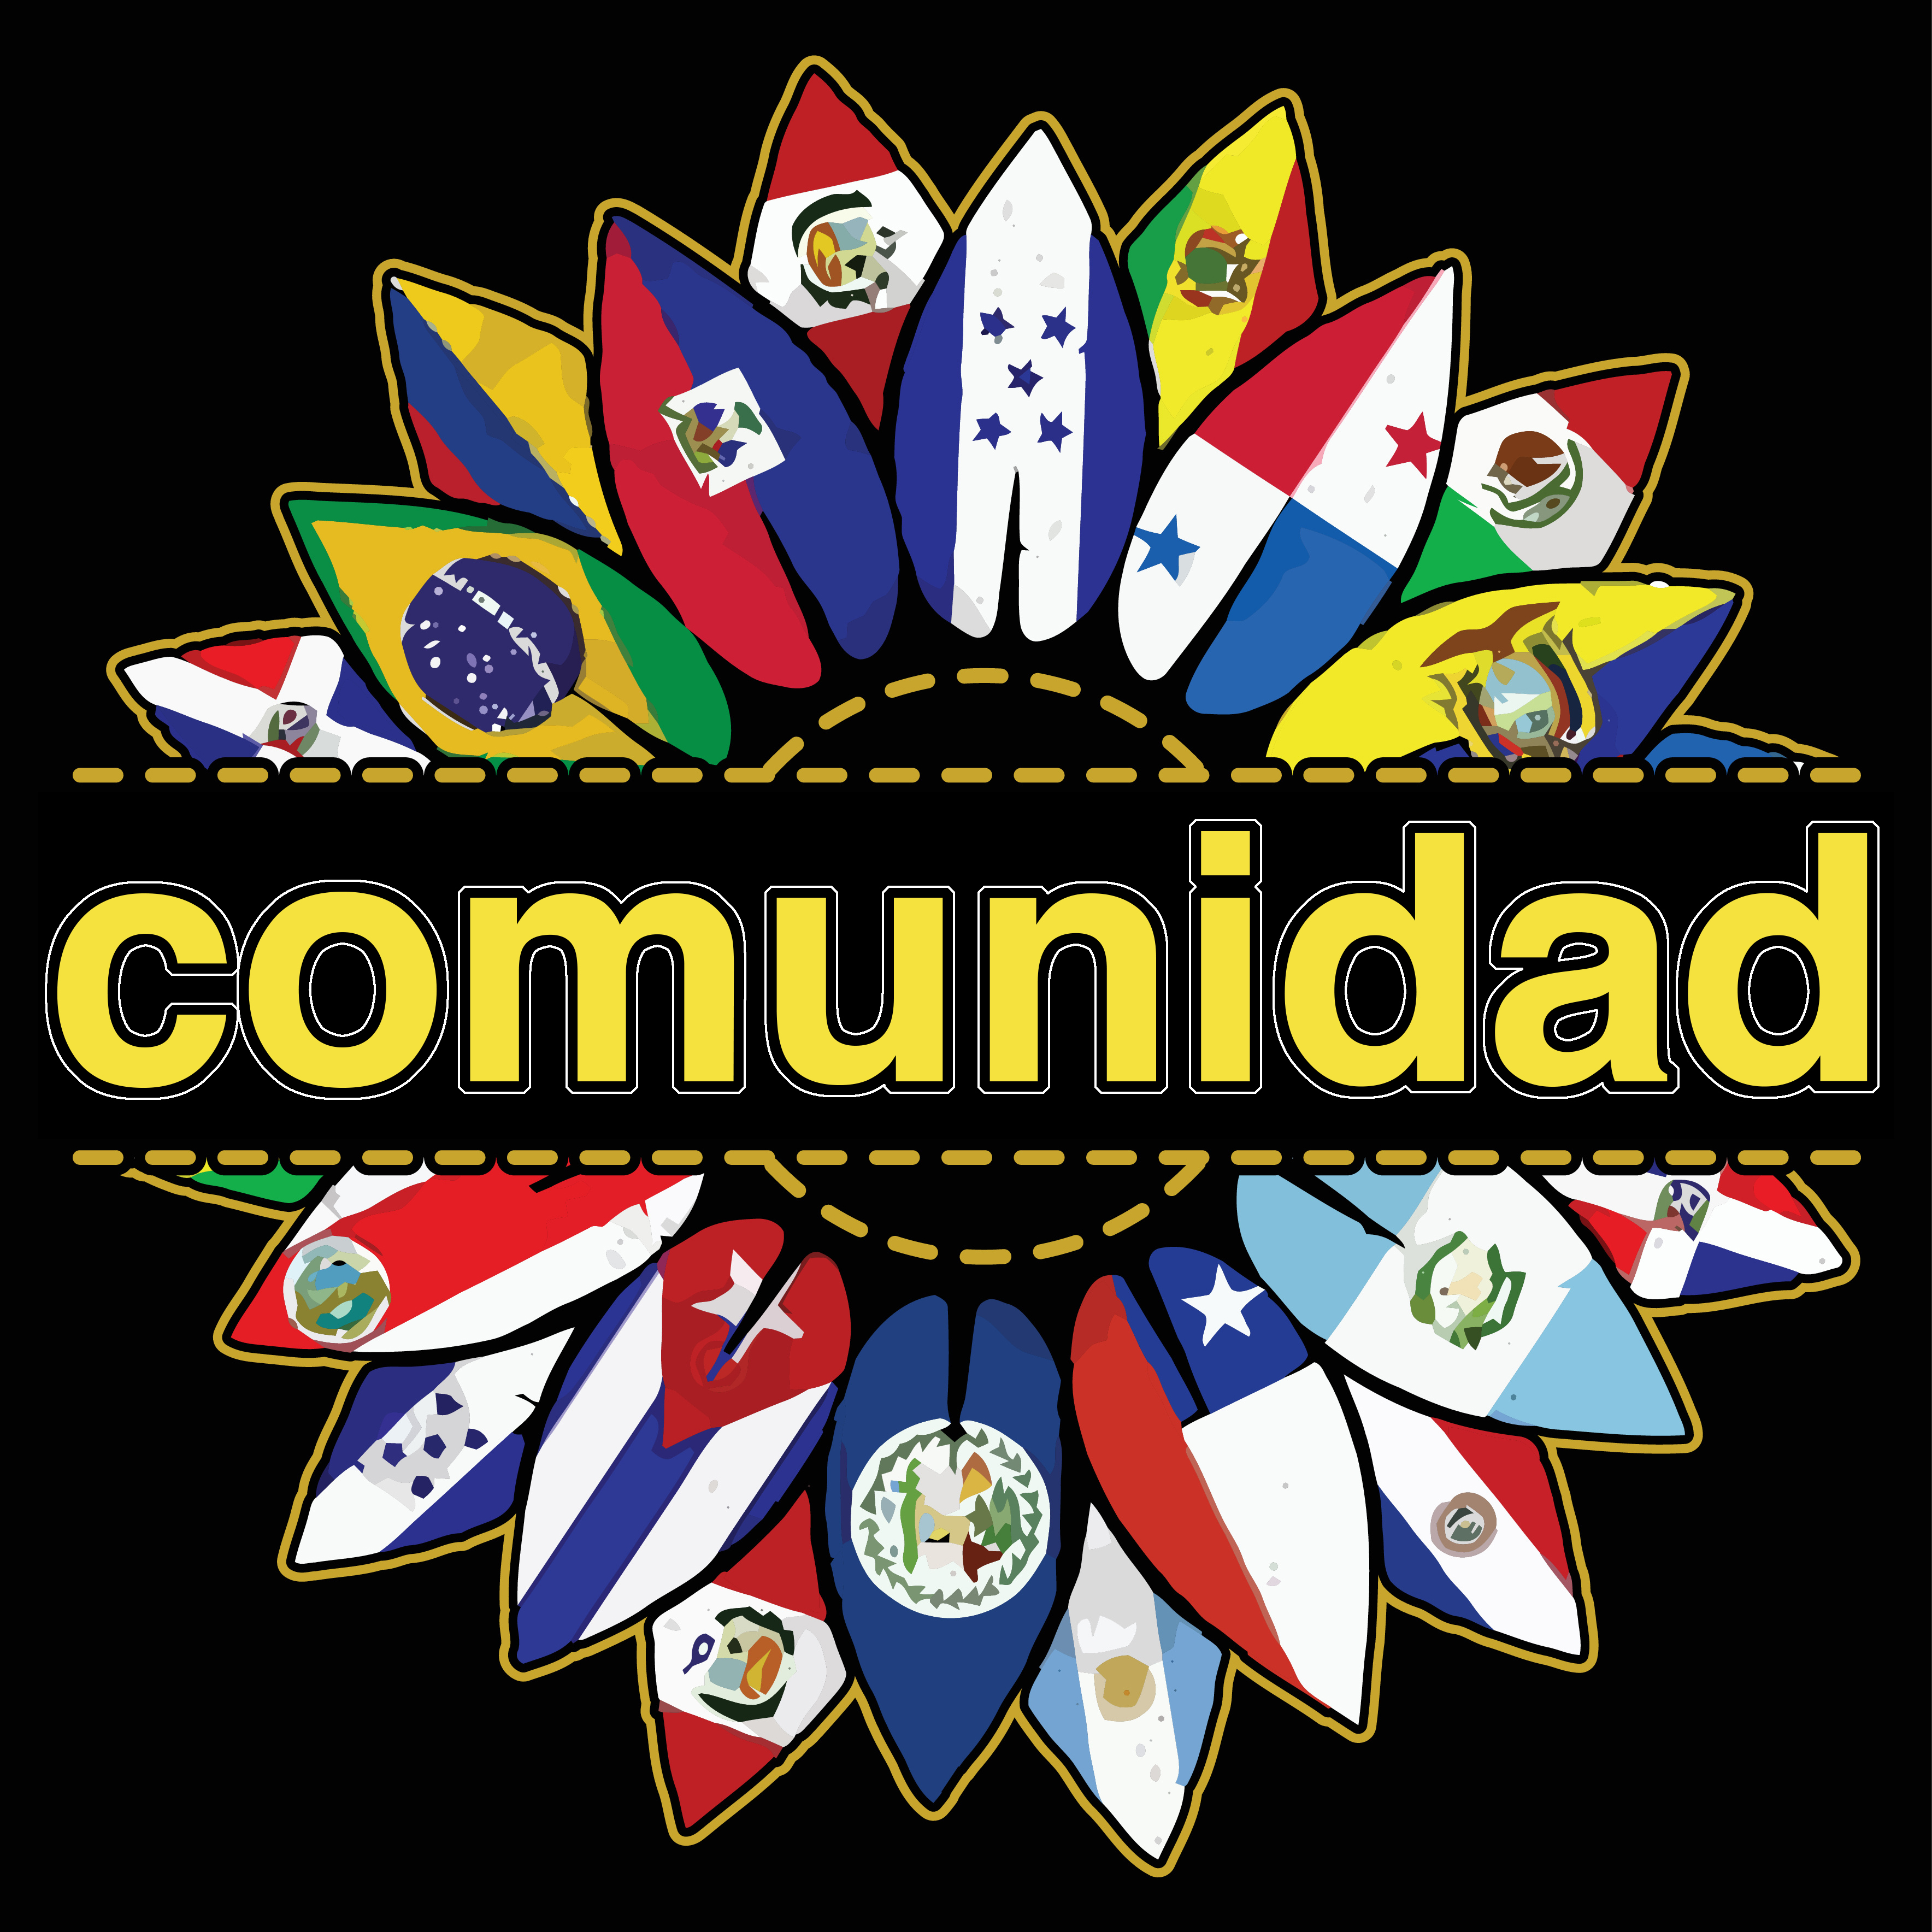 Latin country flags in the shape of a sunflower with the word comunidad (community) in the middle. image link to story